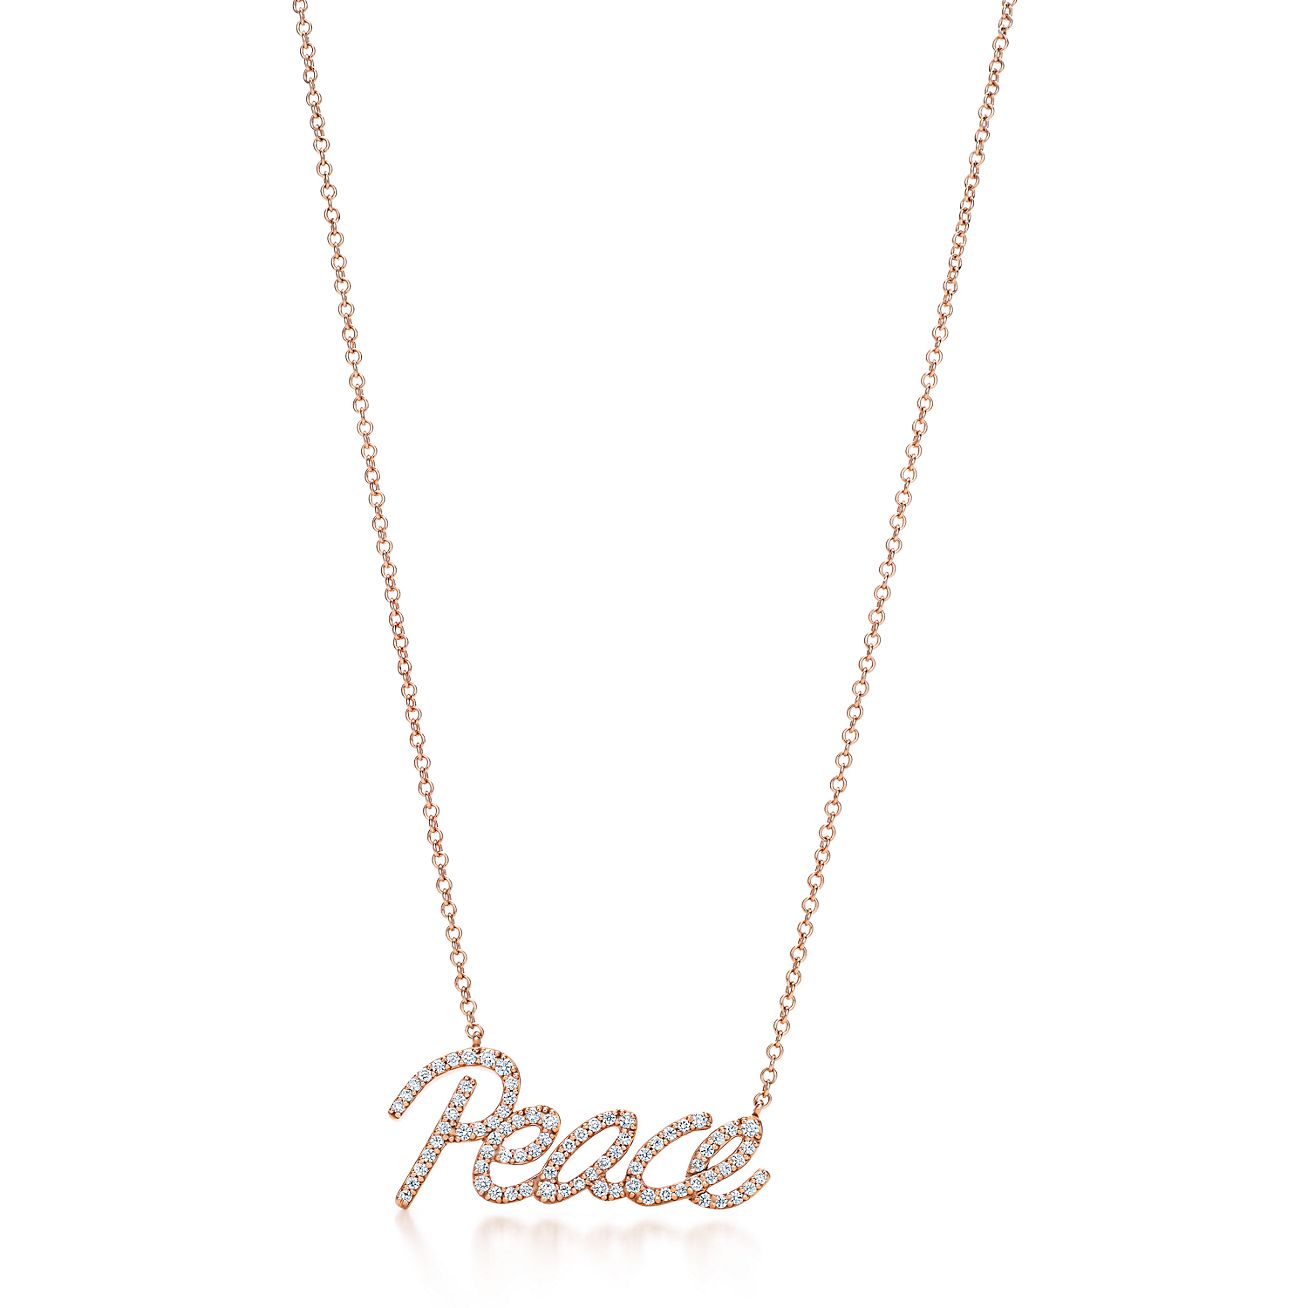 Details about   14k Yellow White or Rose Gold Peace Dove Charm Pendant